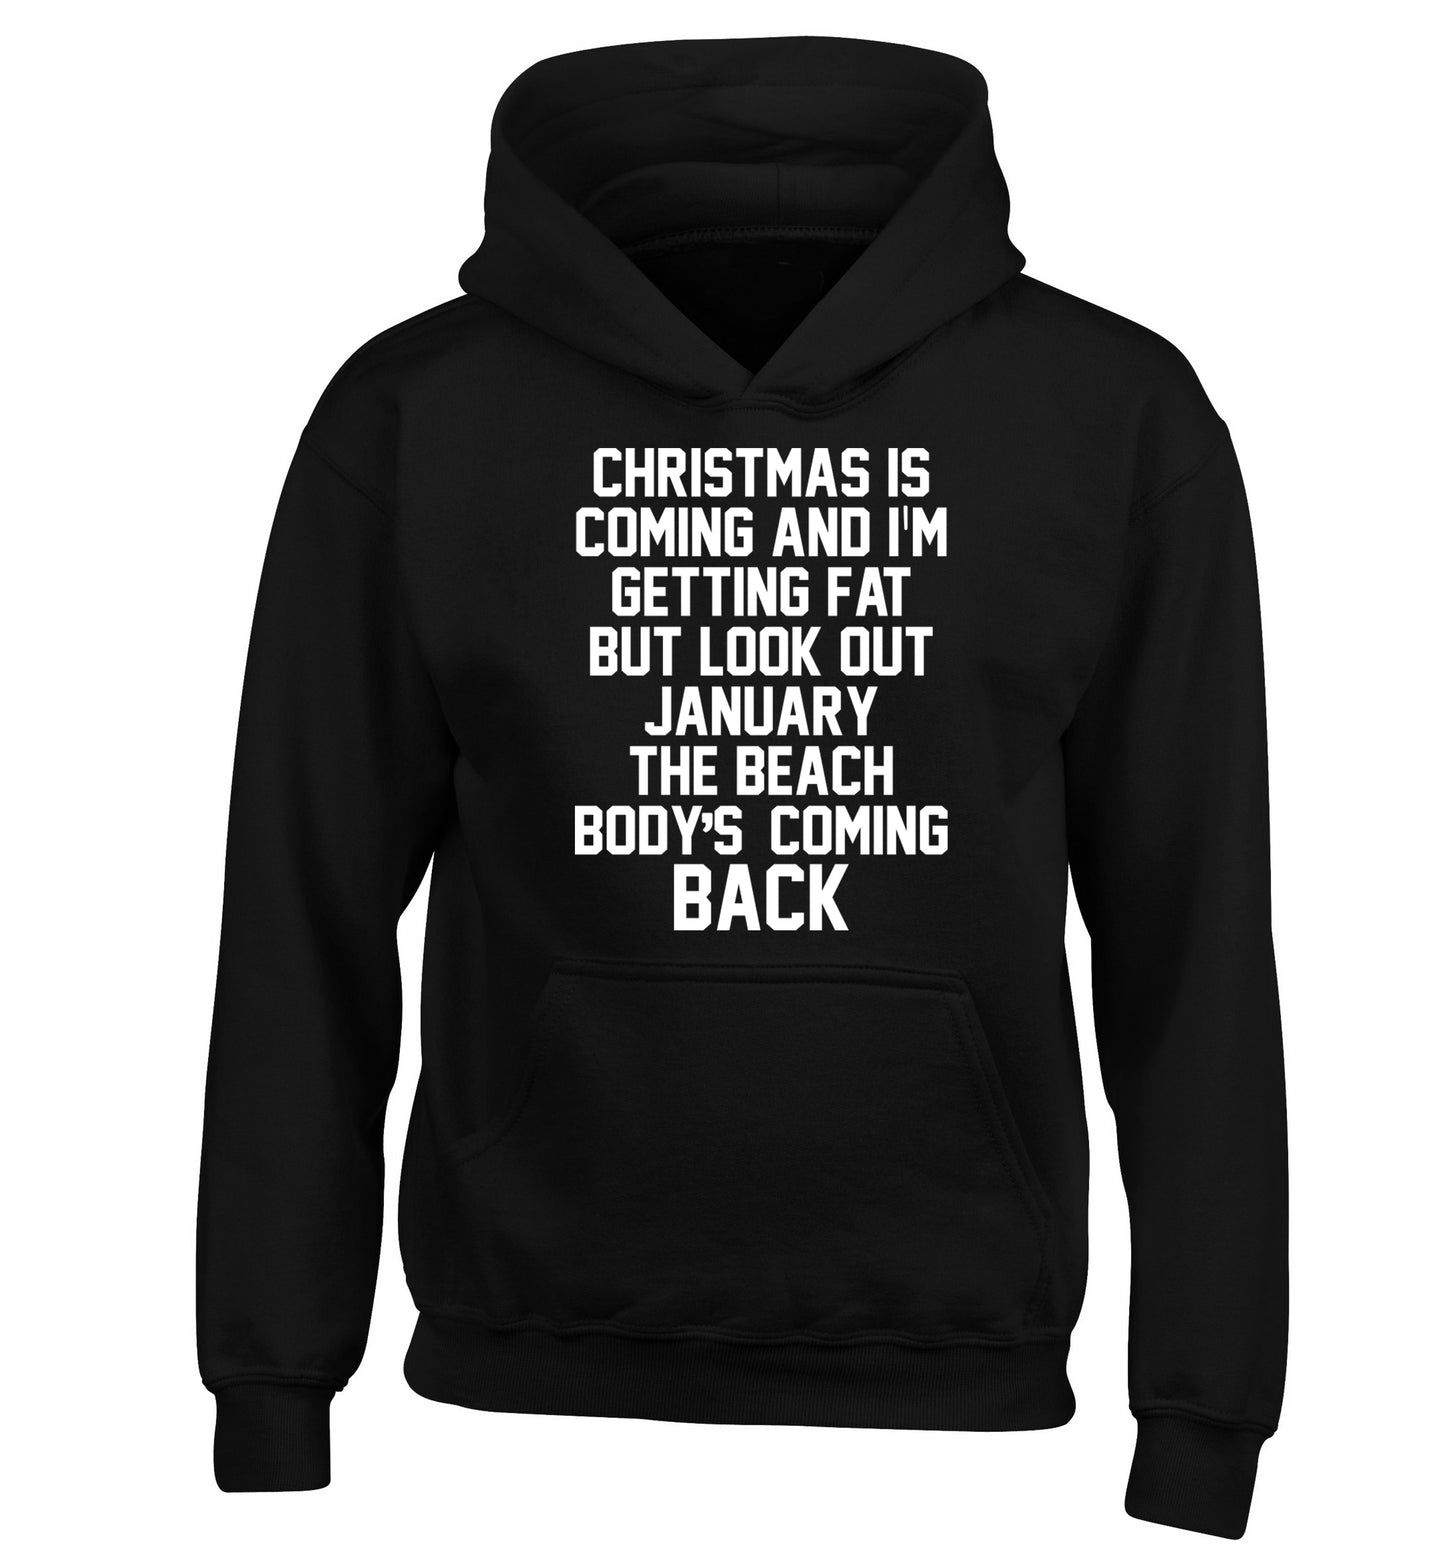 Christmas is coming and I'm getting fat but look out January the beach body's coming back! children's black hoodie 12-14 Years